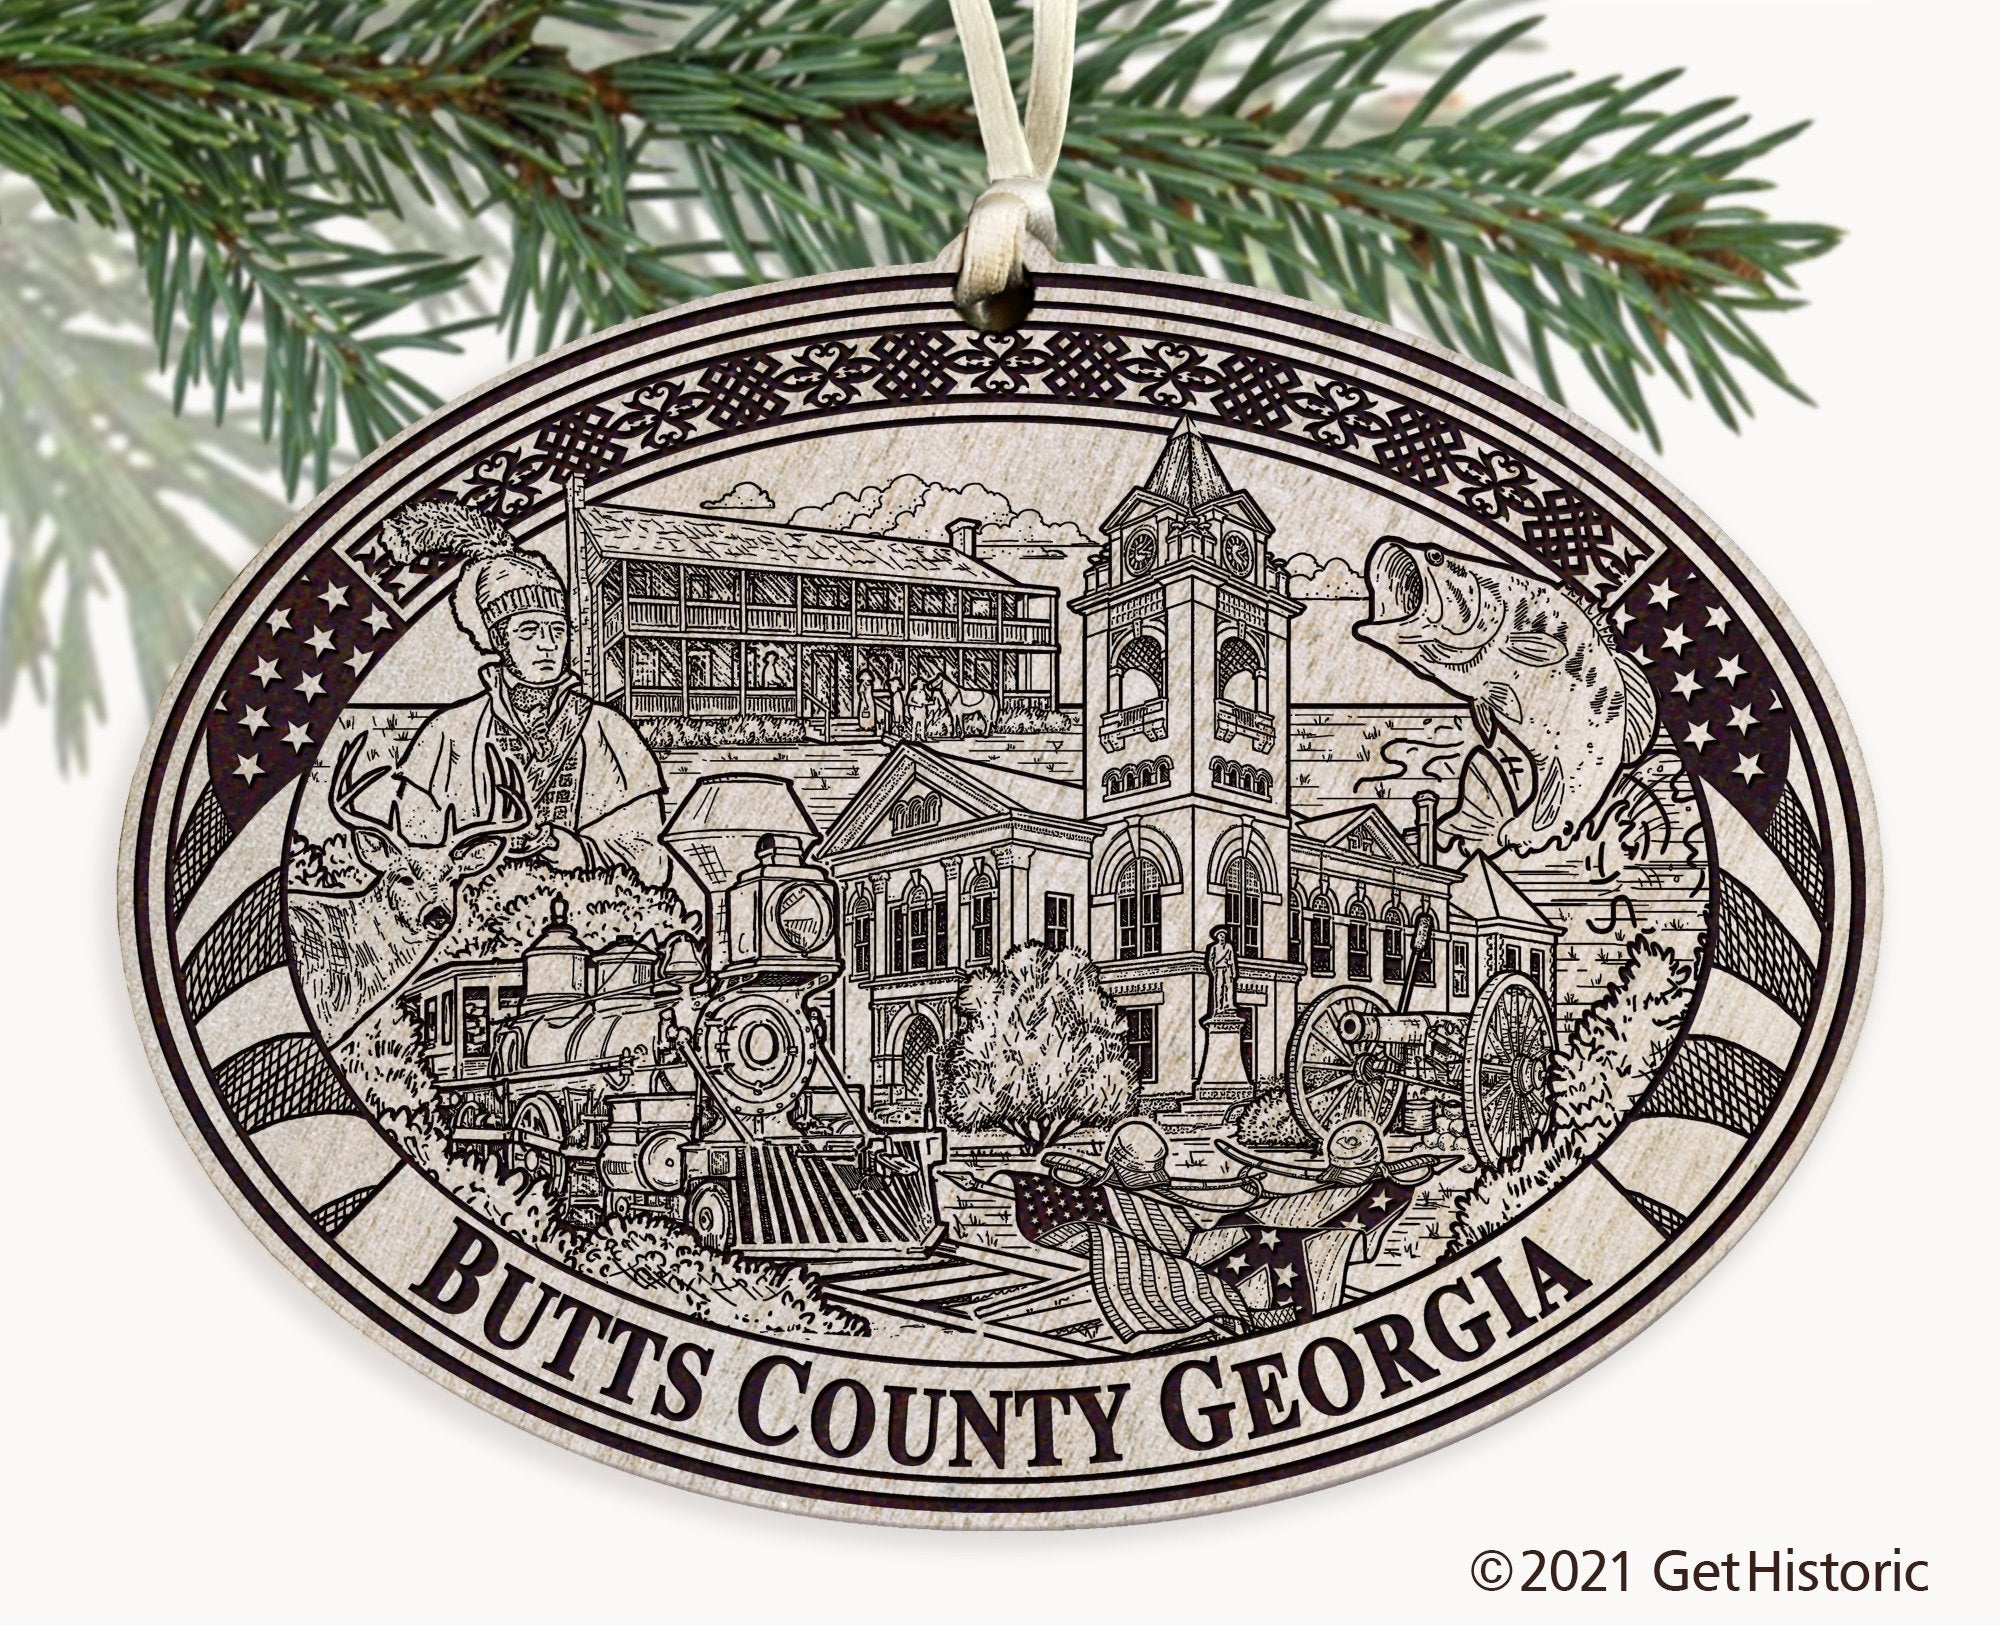 Butts County Georgia Engraved Ornament